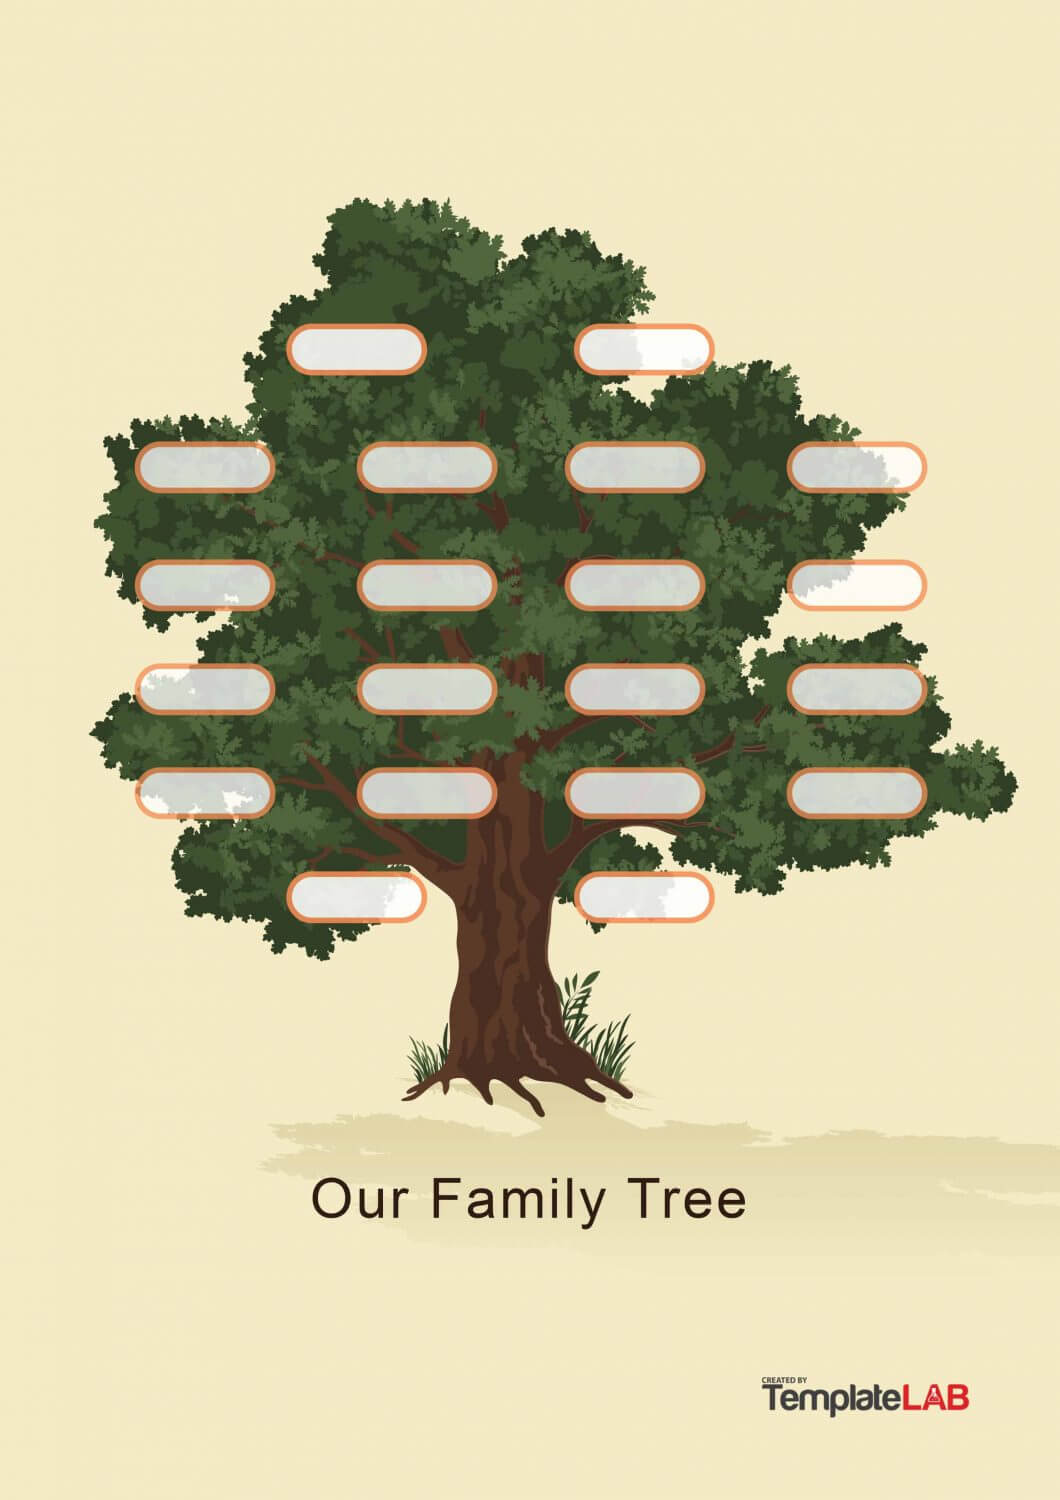 50+ Free Family Tree Templates (Word, Excel, Pdf) ᐅ Inside Fill In The Blank Family Tree Template